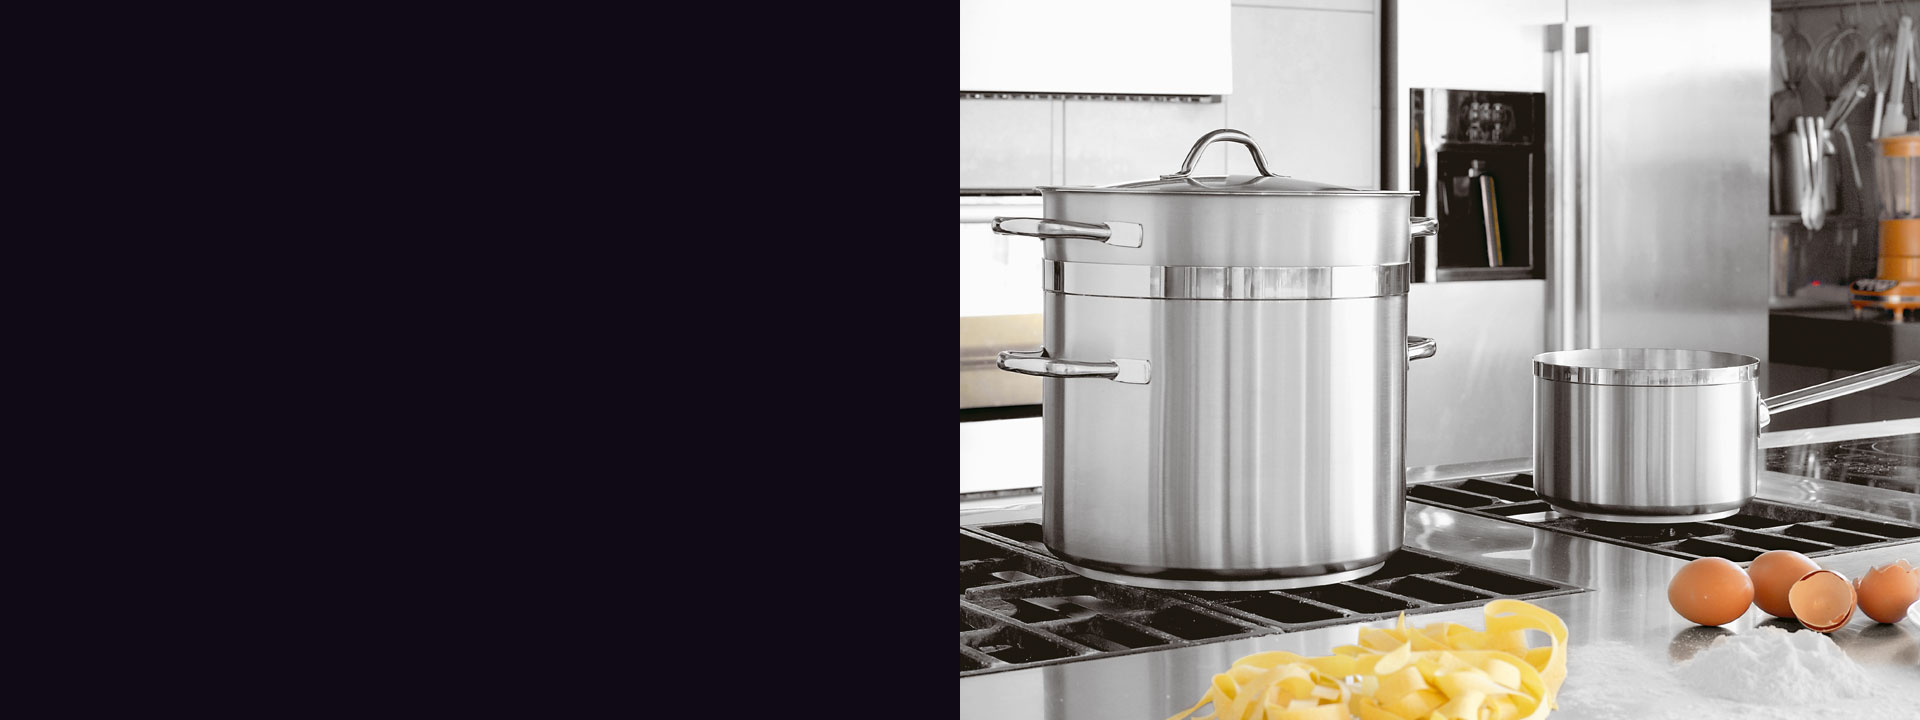 Paderno - Cocotte ghisa d.10 cm - Italian Cooking Store